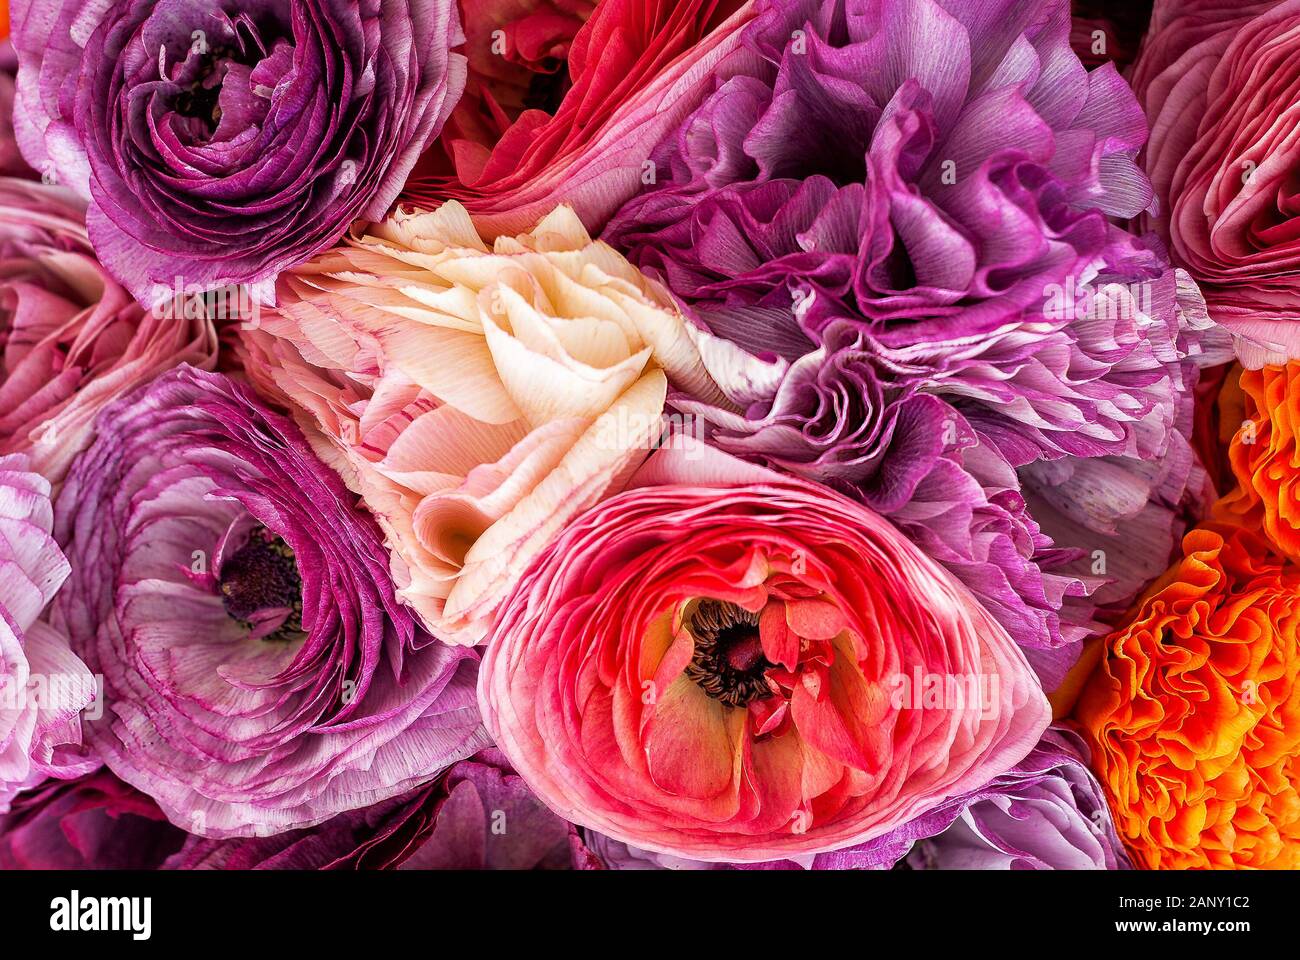 Beautiful flowers in bloom. Close up vibrant colorful ranunculus. Stock Photo